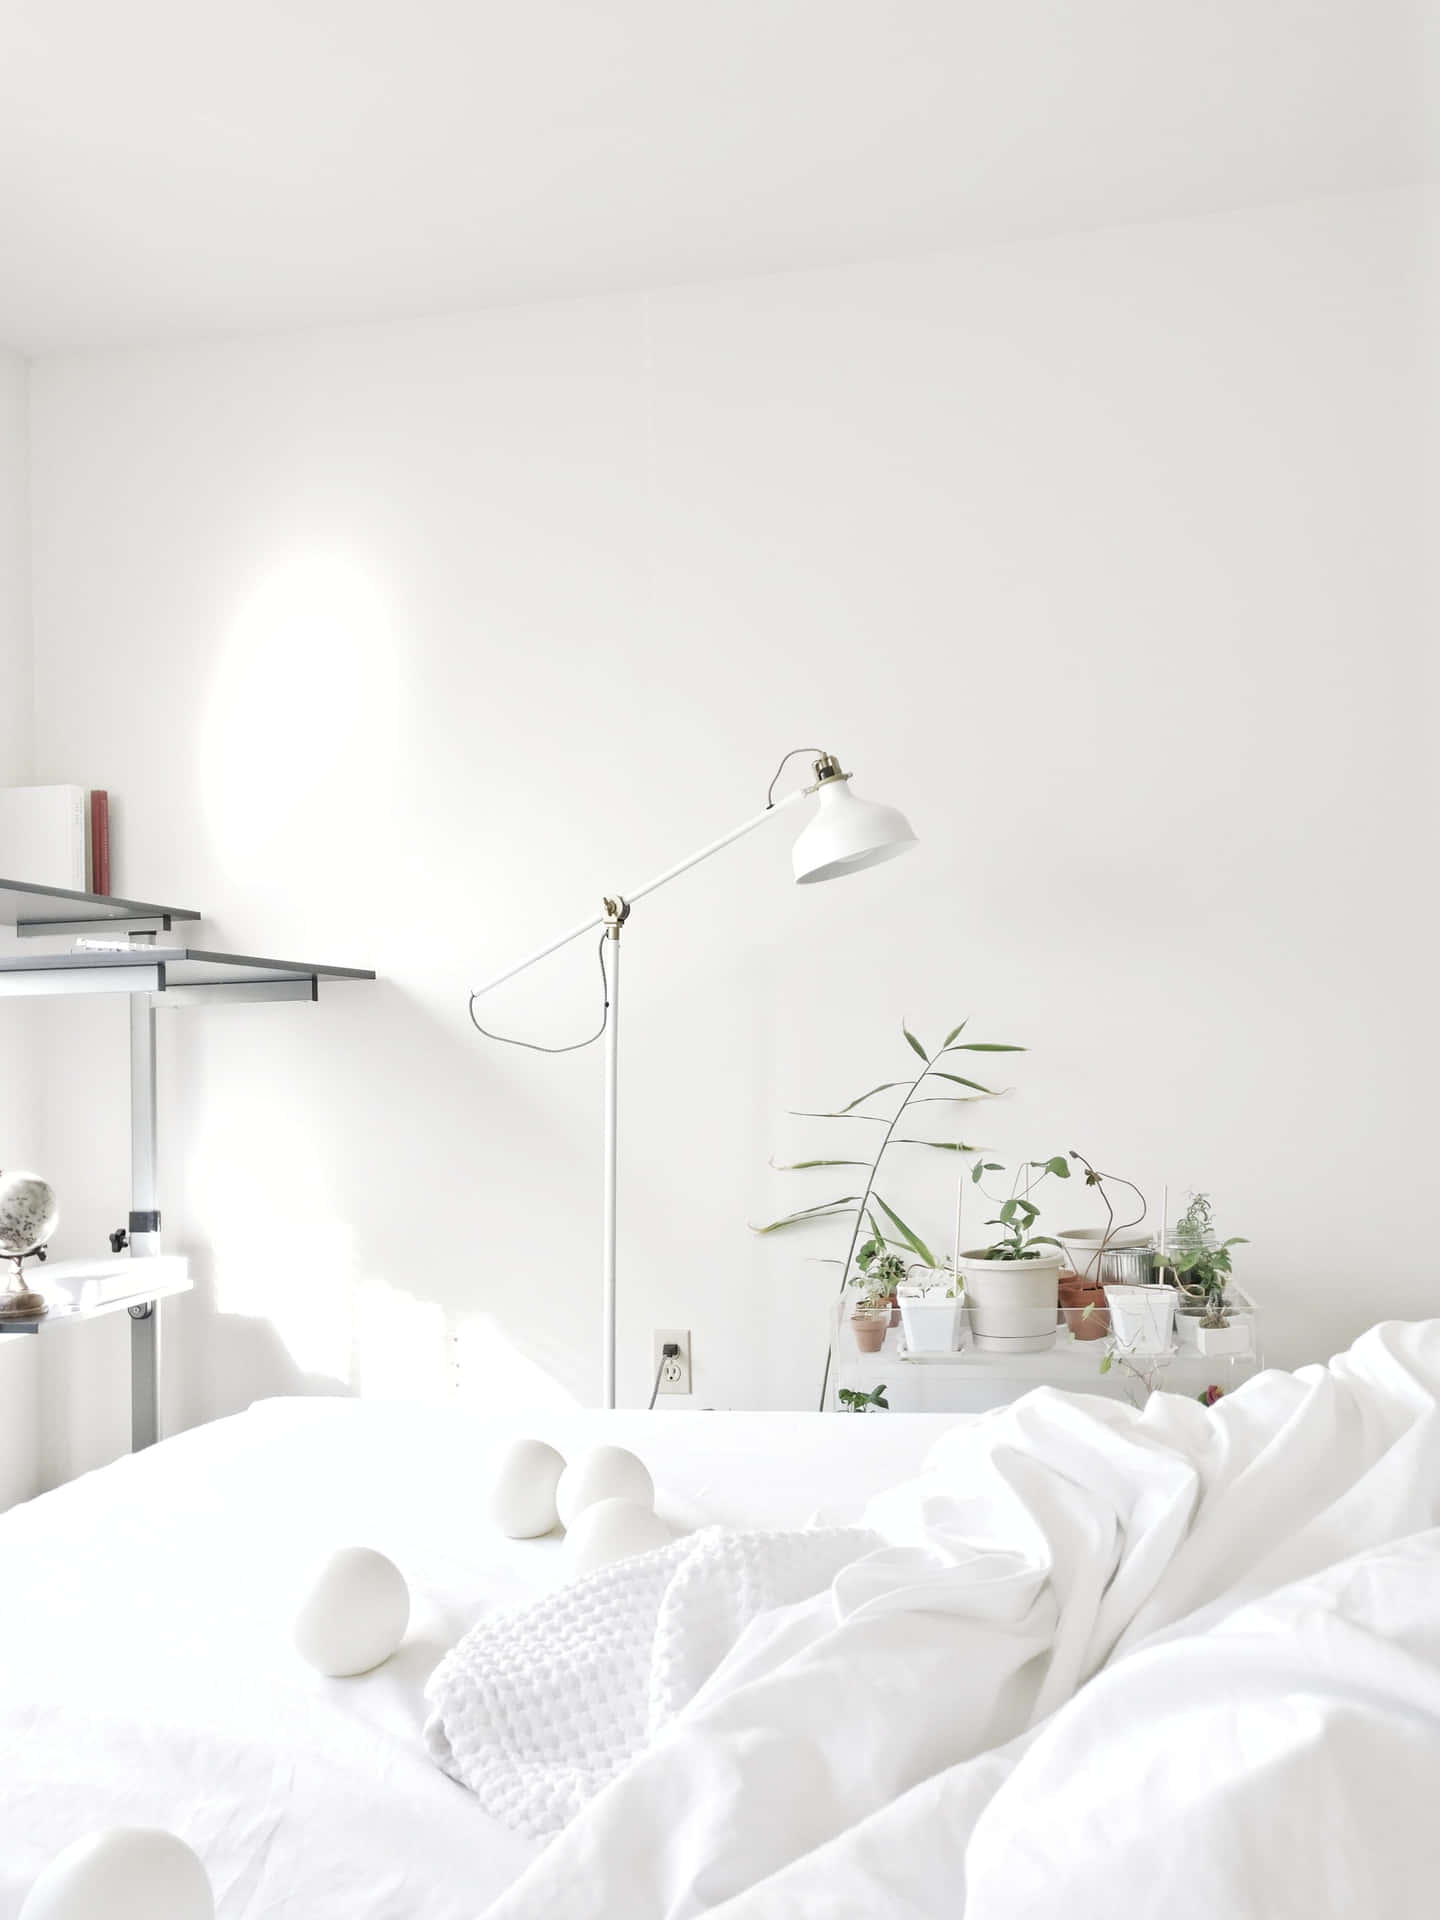 Minimalism perfection in an aesthetic style